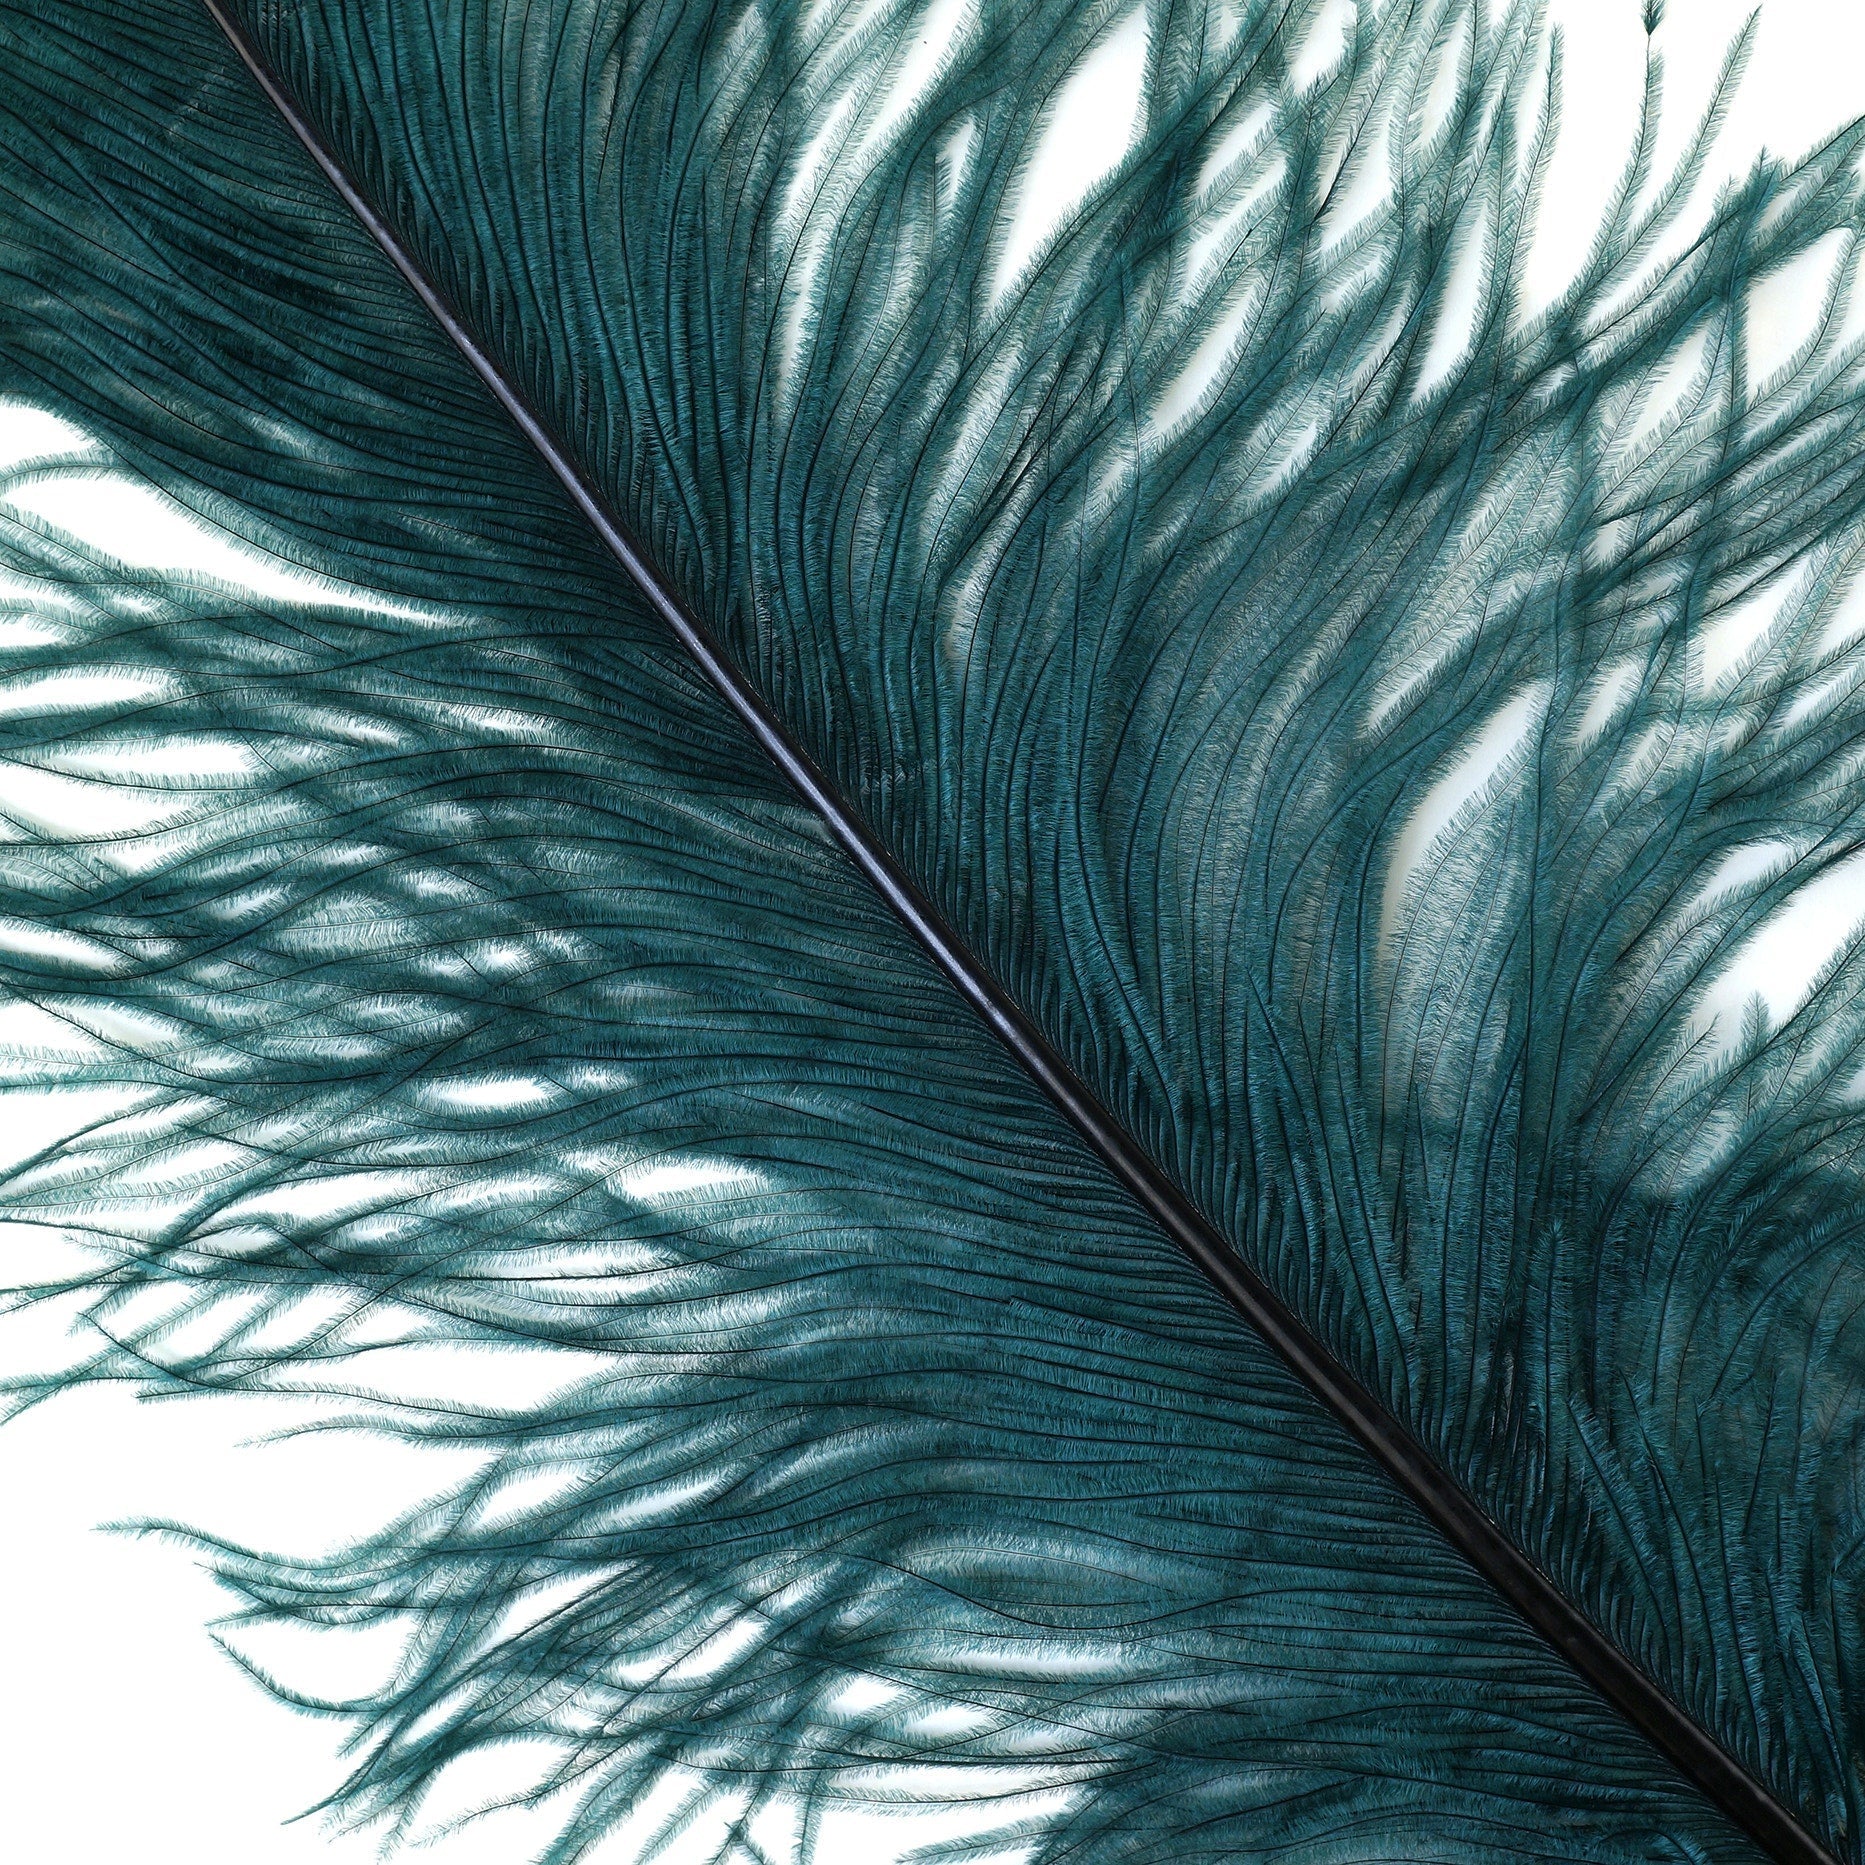 1/2 lb. - 18-24 Teal Green Large Wing Plumes Wholesale Feathers